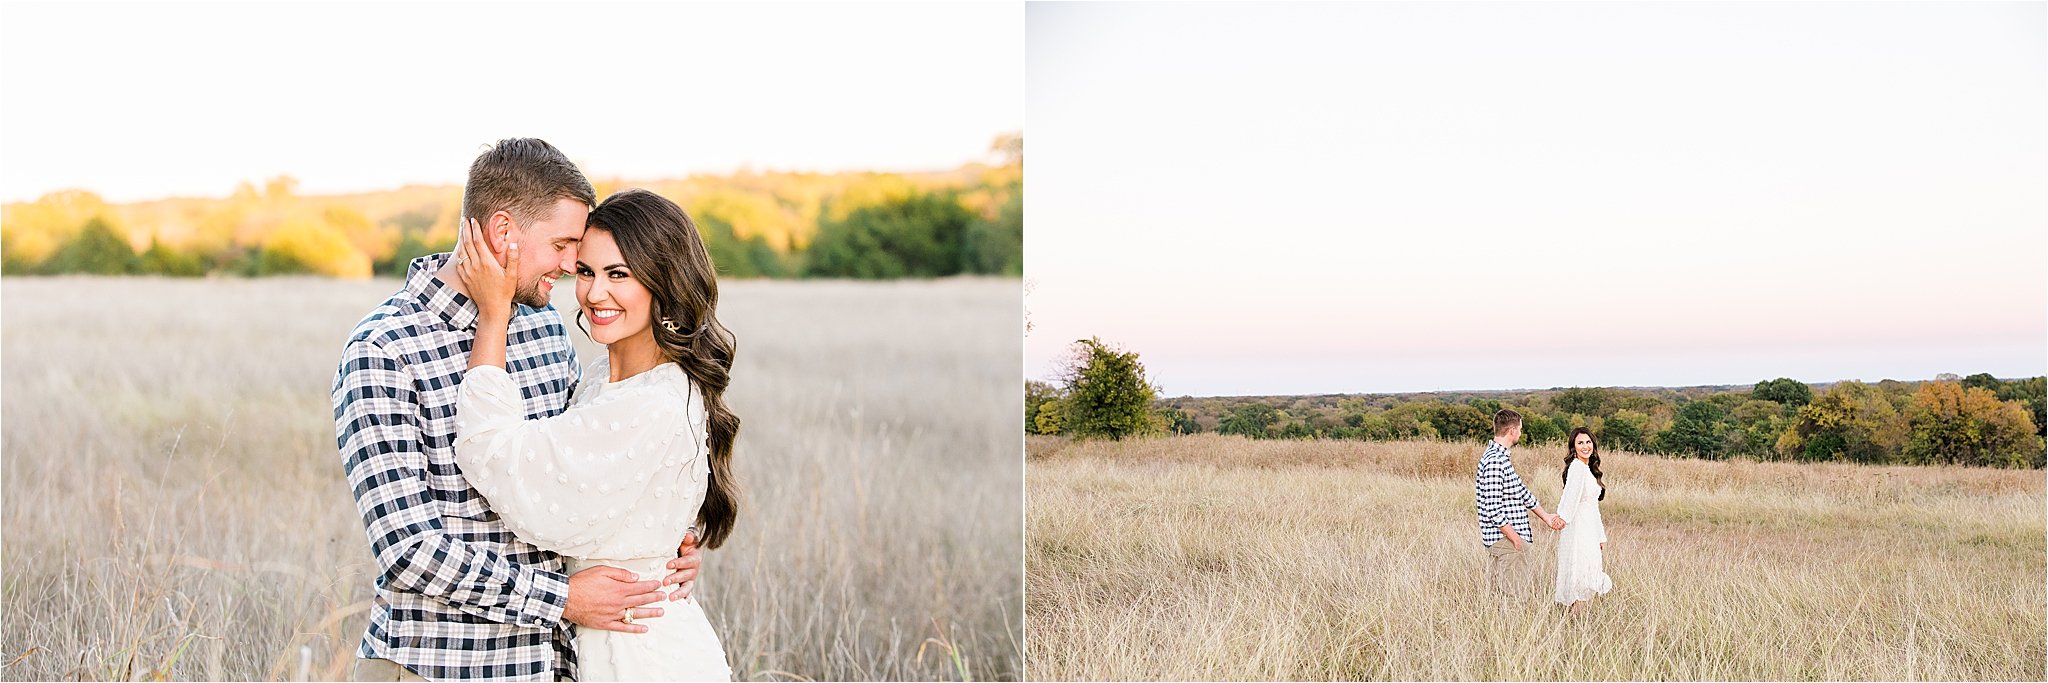 A beautiful bride to be in an ivory lace dress embraces her fiance during their field engagement session in McKinney, Texas 